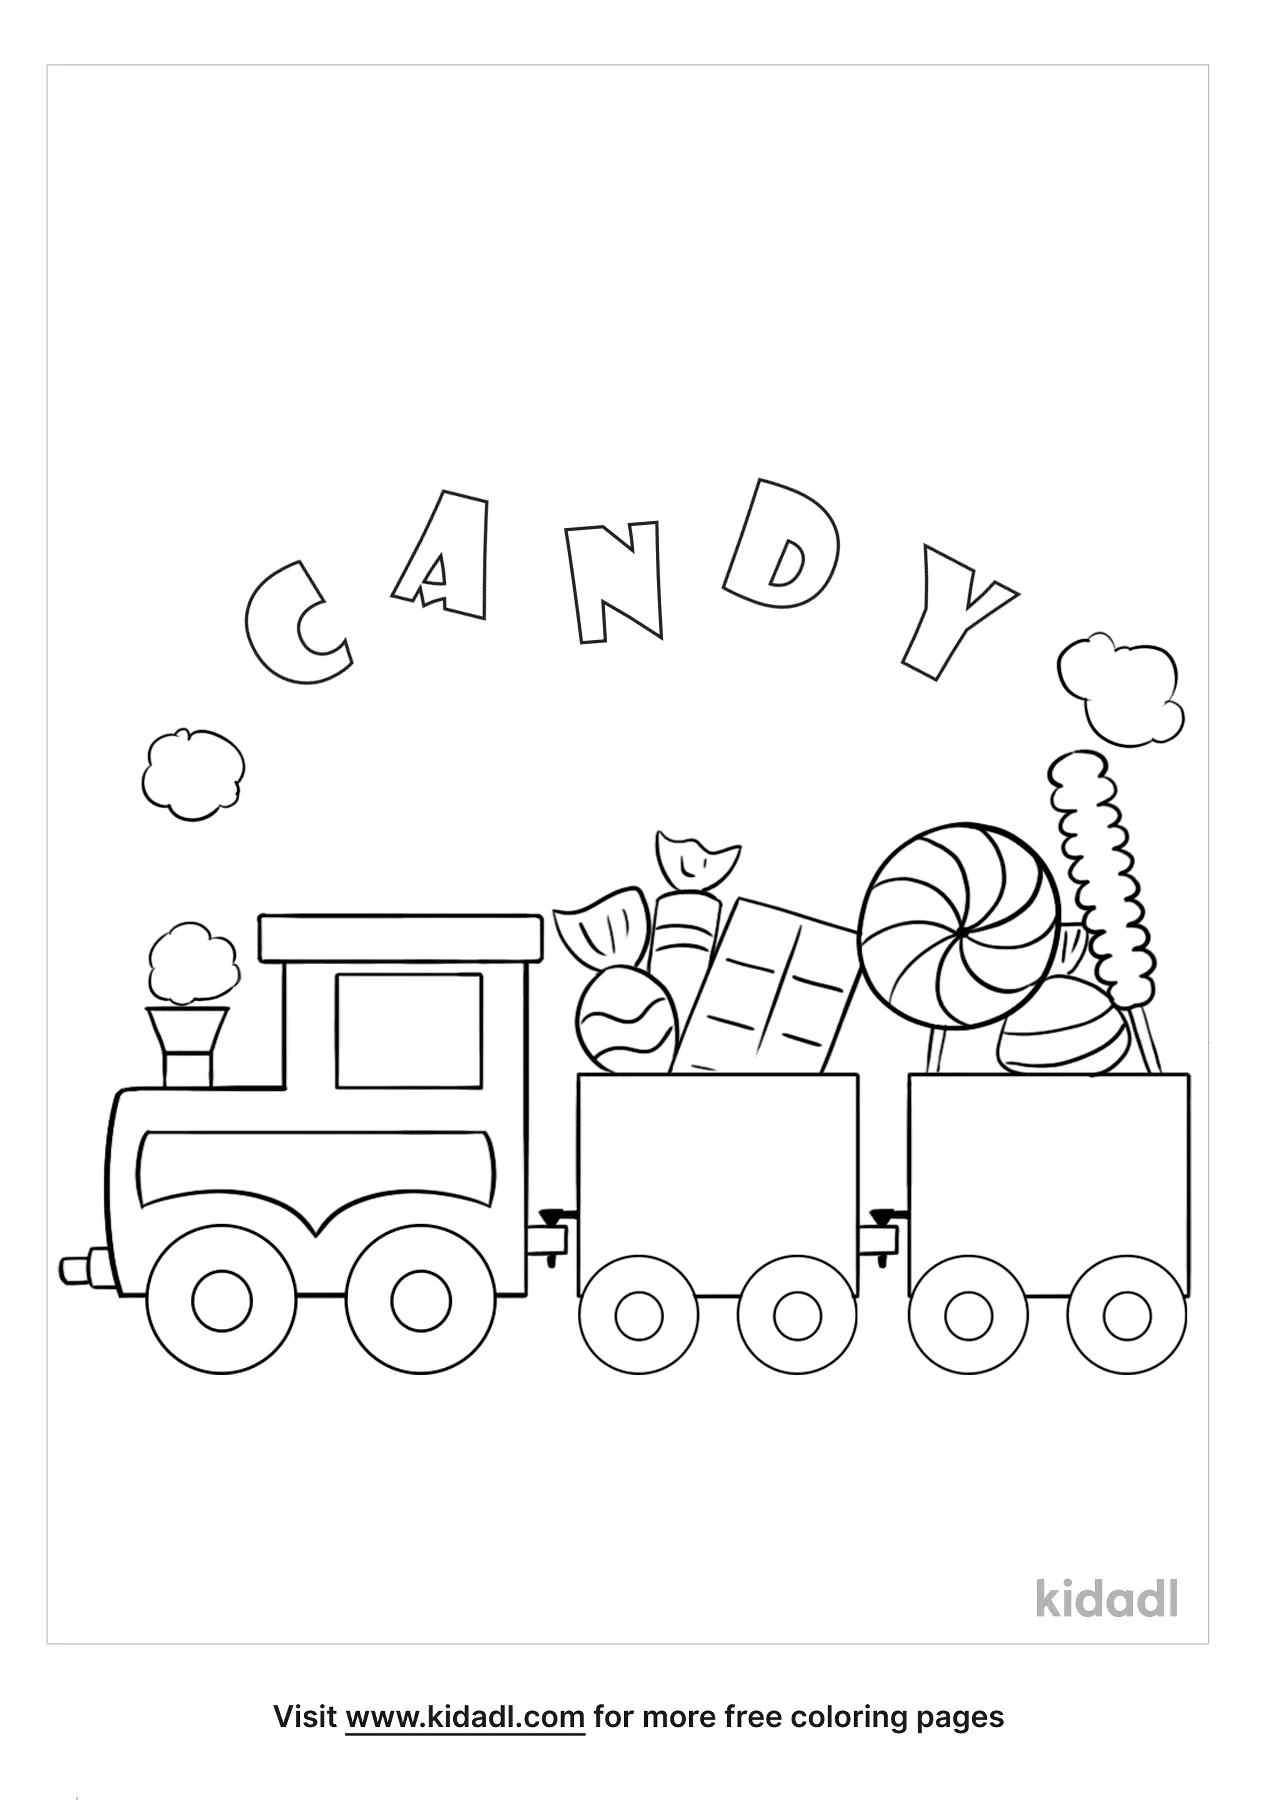 Candy Train Coloring Page